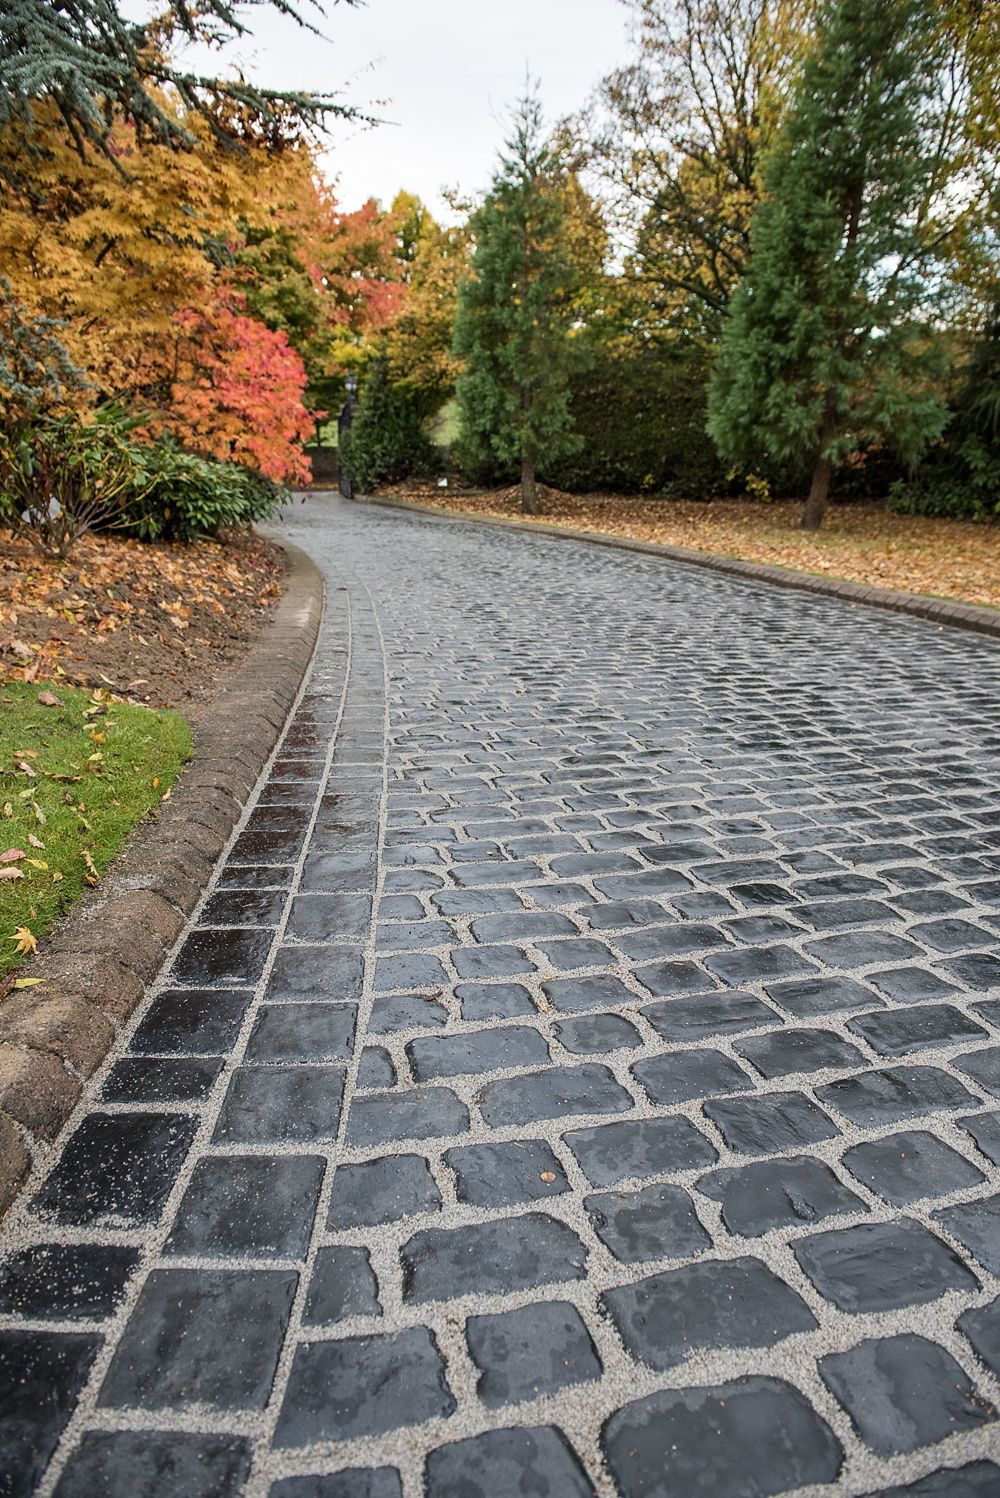 The Benefits of Installing Driveway Pavers for Your Home